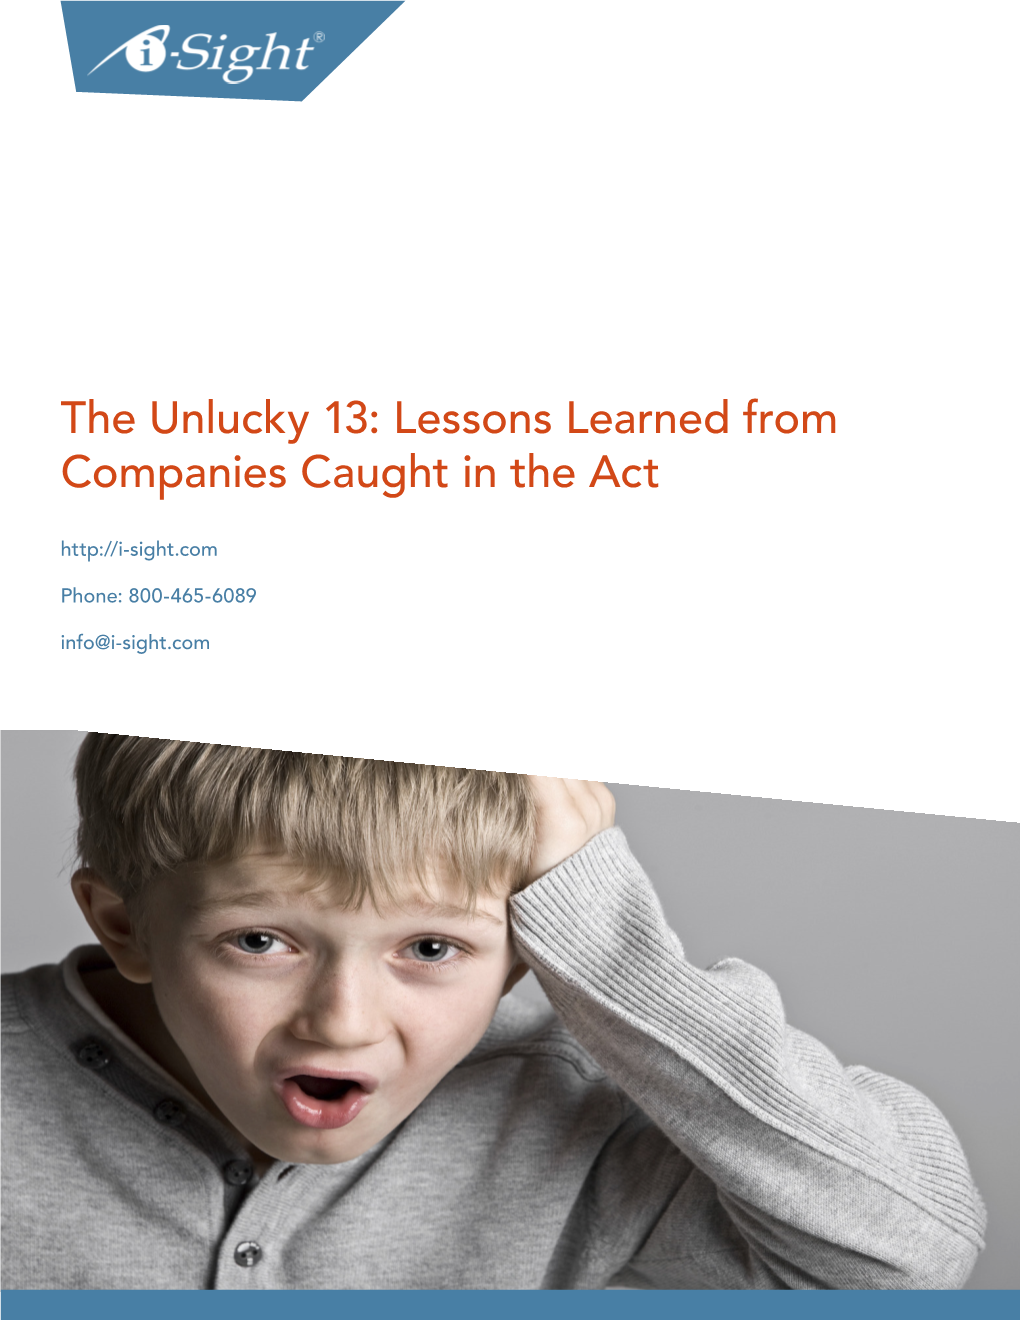 Lessons Learned from Companies Caught in the Act